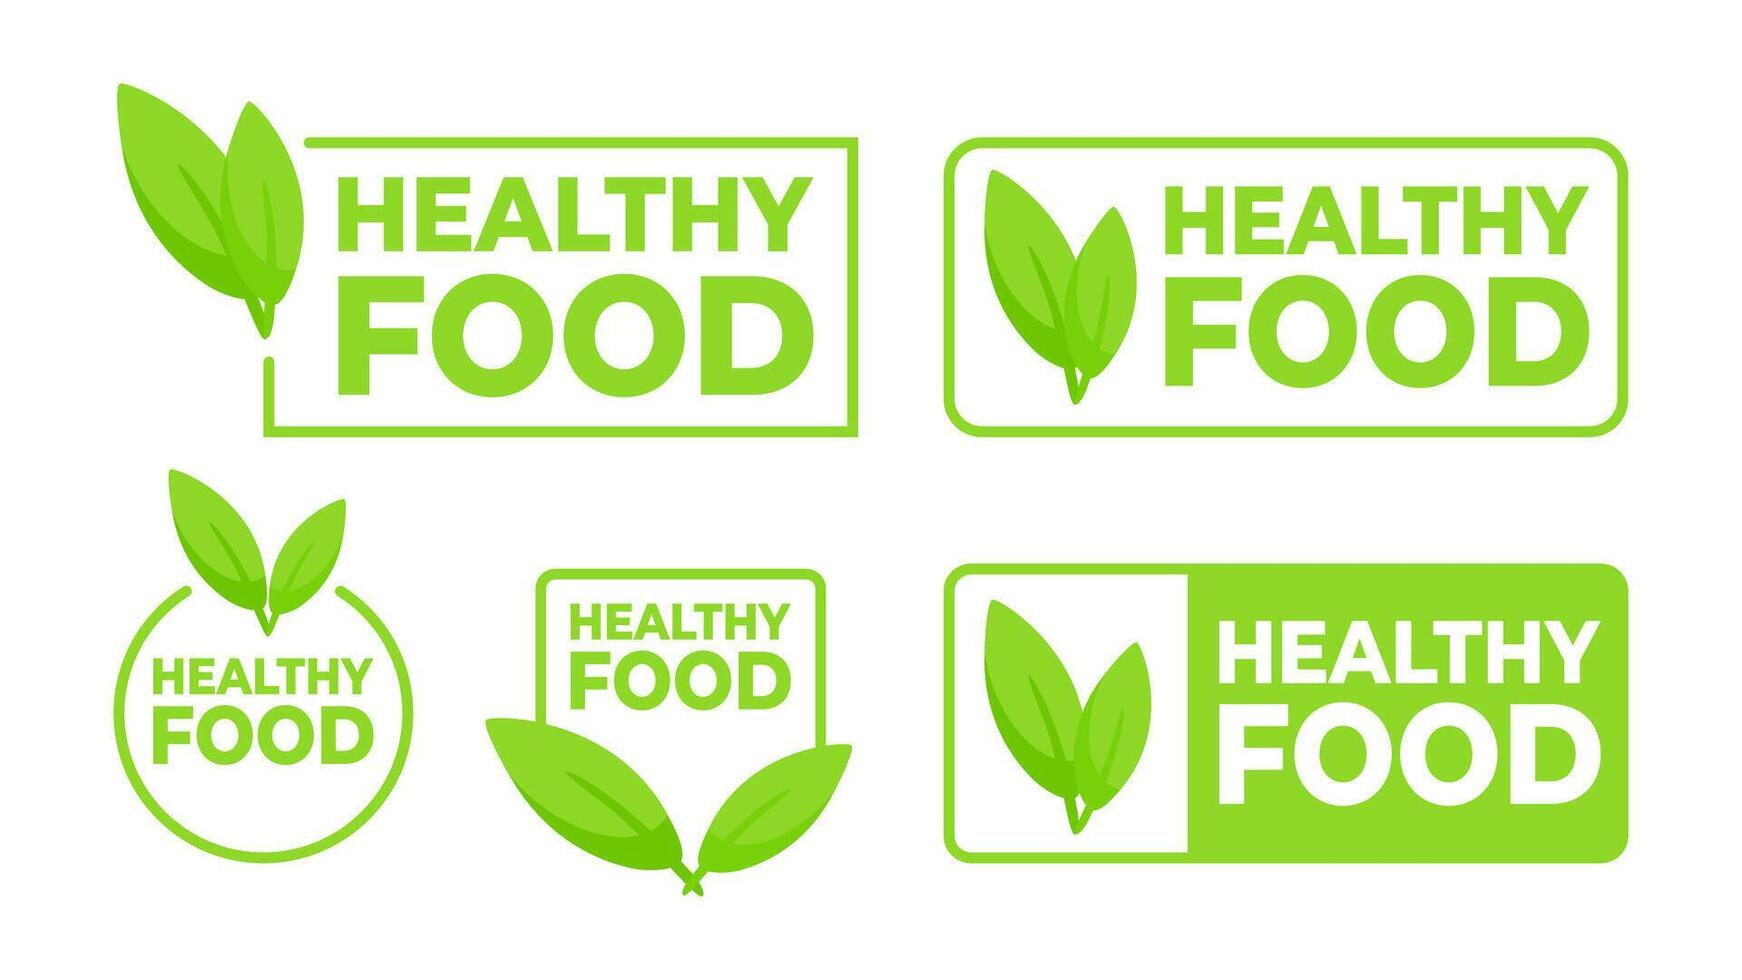 Set of green labels with Healthy Food text and a leaf icon, for marking nutritious and wholesome food options. vector